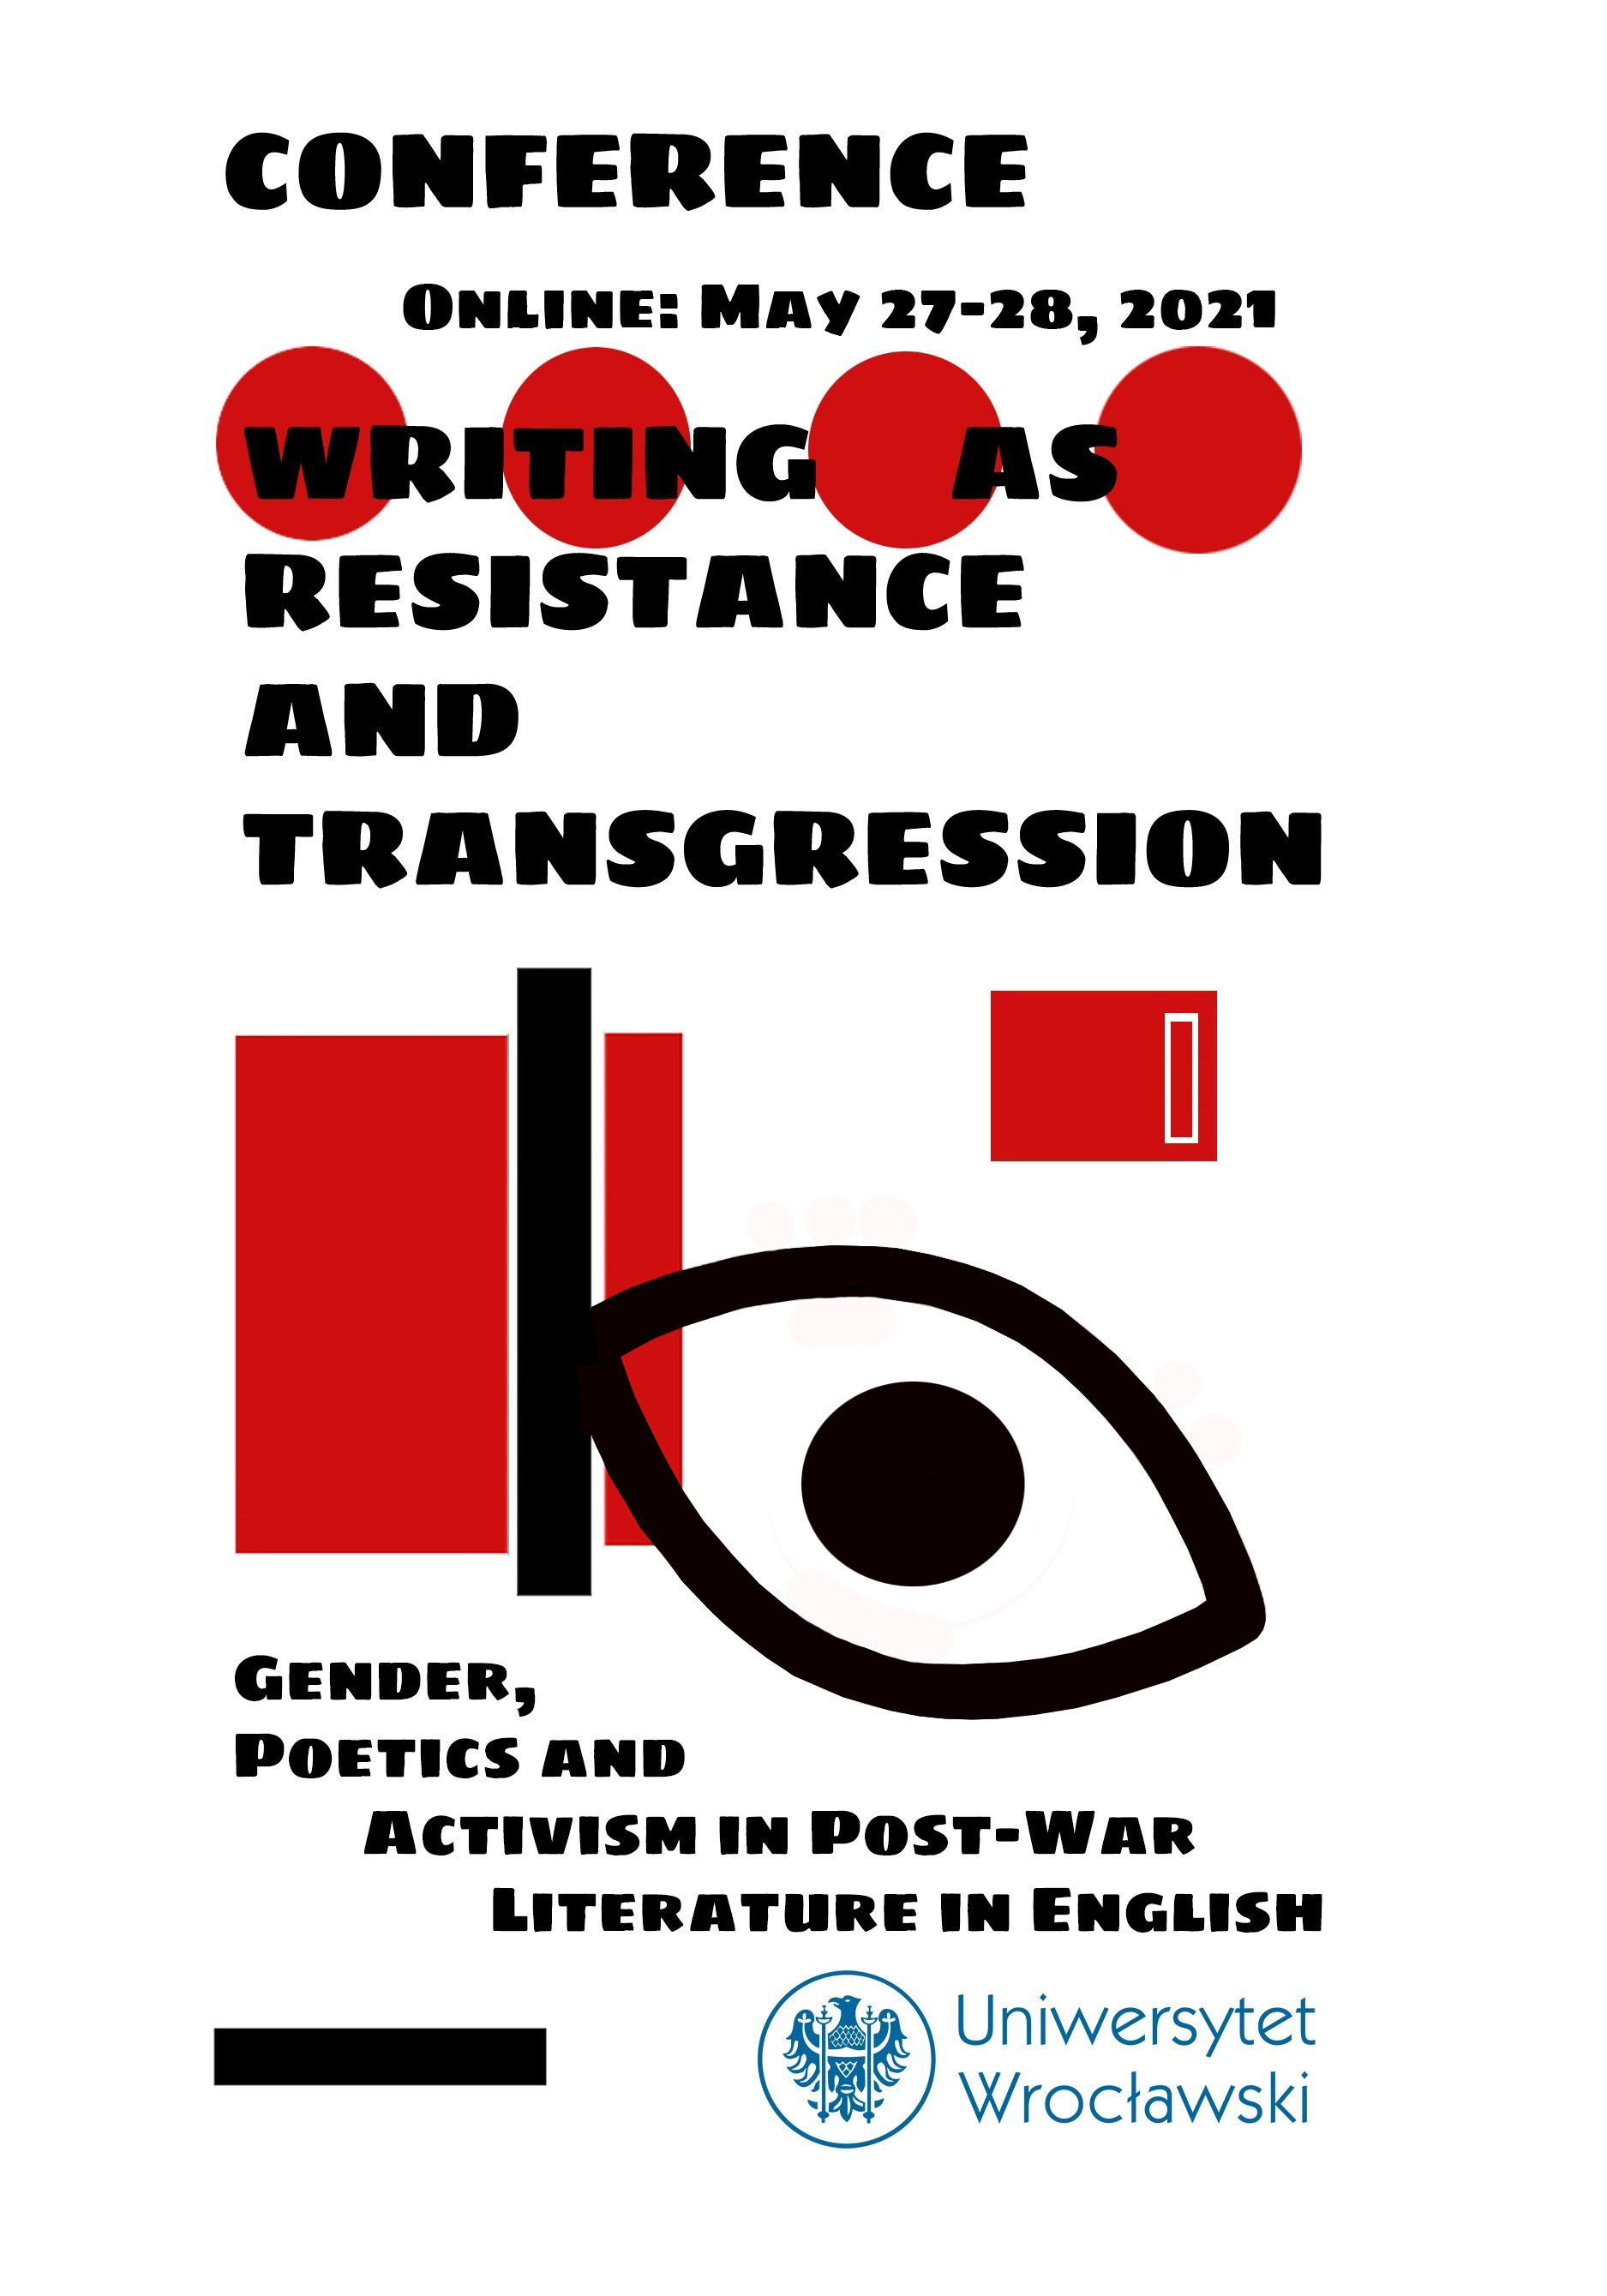 Annexe post-531211-Poster_WritingAsResistance_UWr_IFA_Conference.jpg